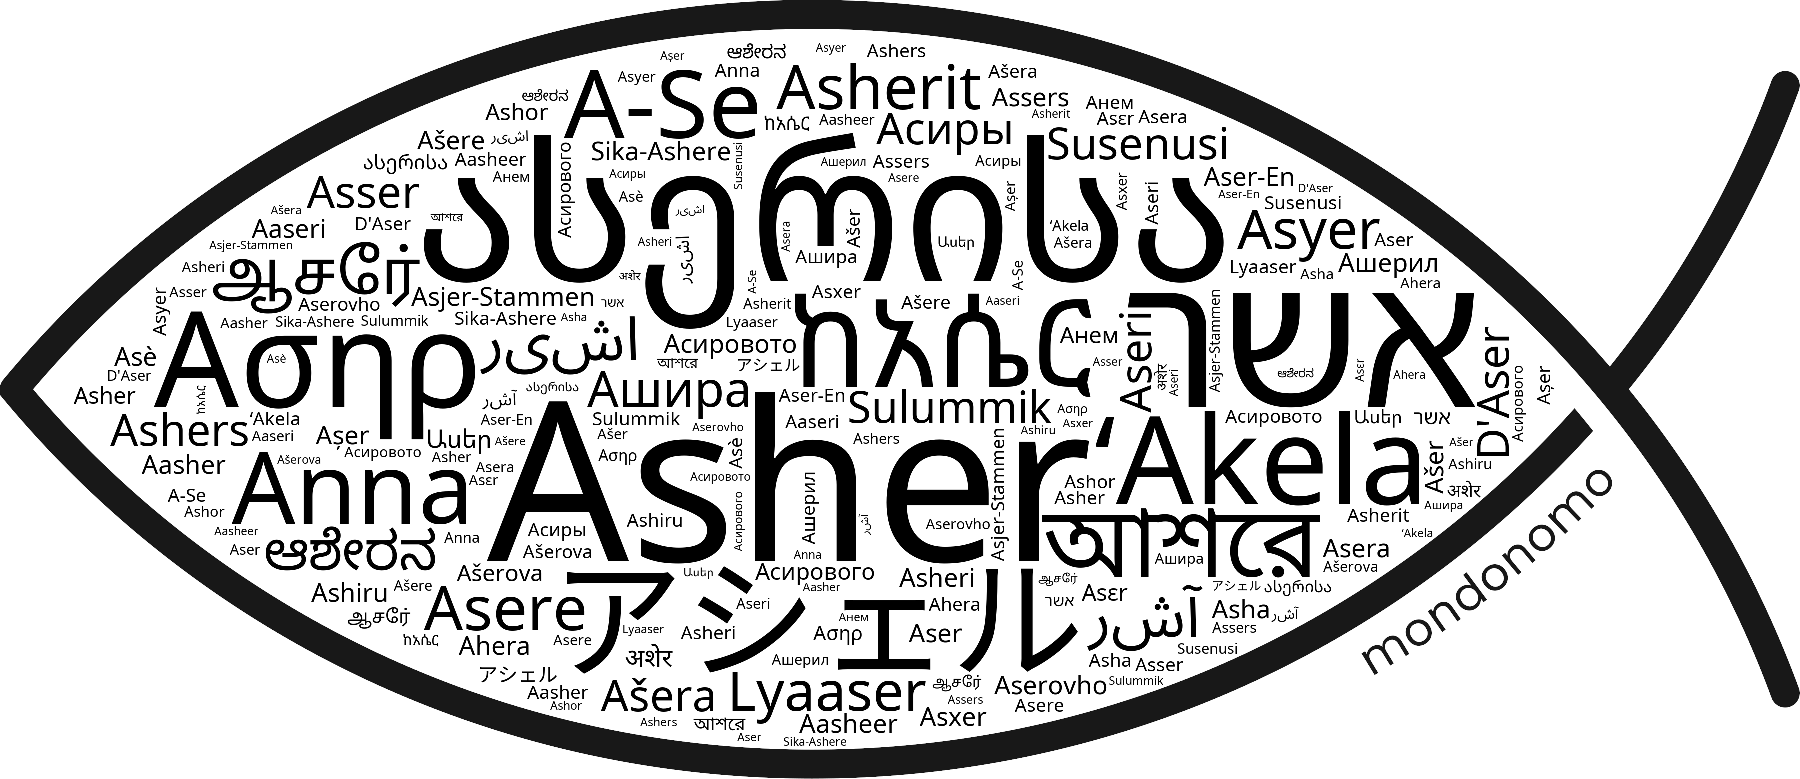 Name Asher in the world's Bibles